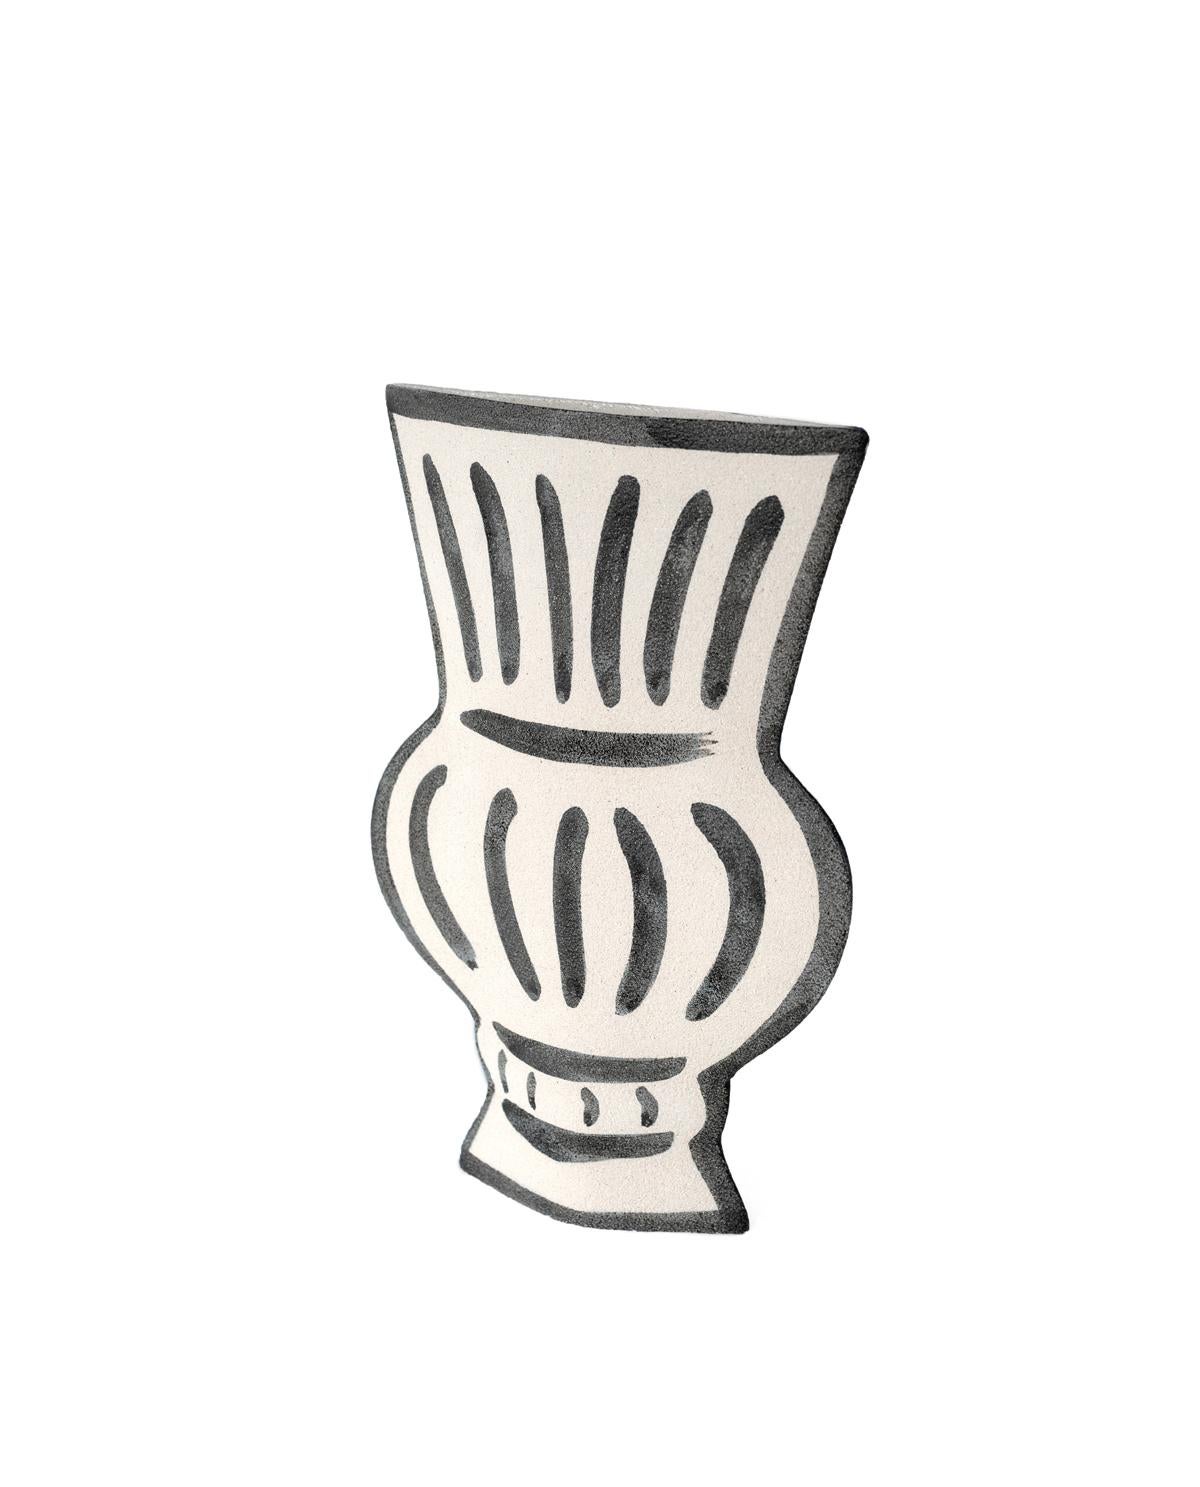 A part of a captivating new line blending ancient Greek pottery with contemporary design, the ‘Volute’ vase showcases delicate black underglaze illustrations that harmonize traditional and modern aesthetics.
Crafted by our designer, the black